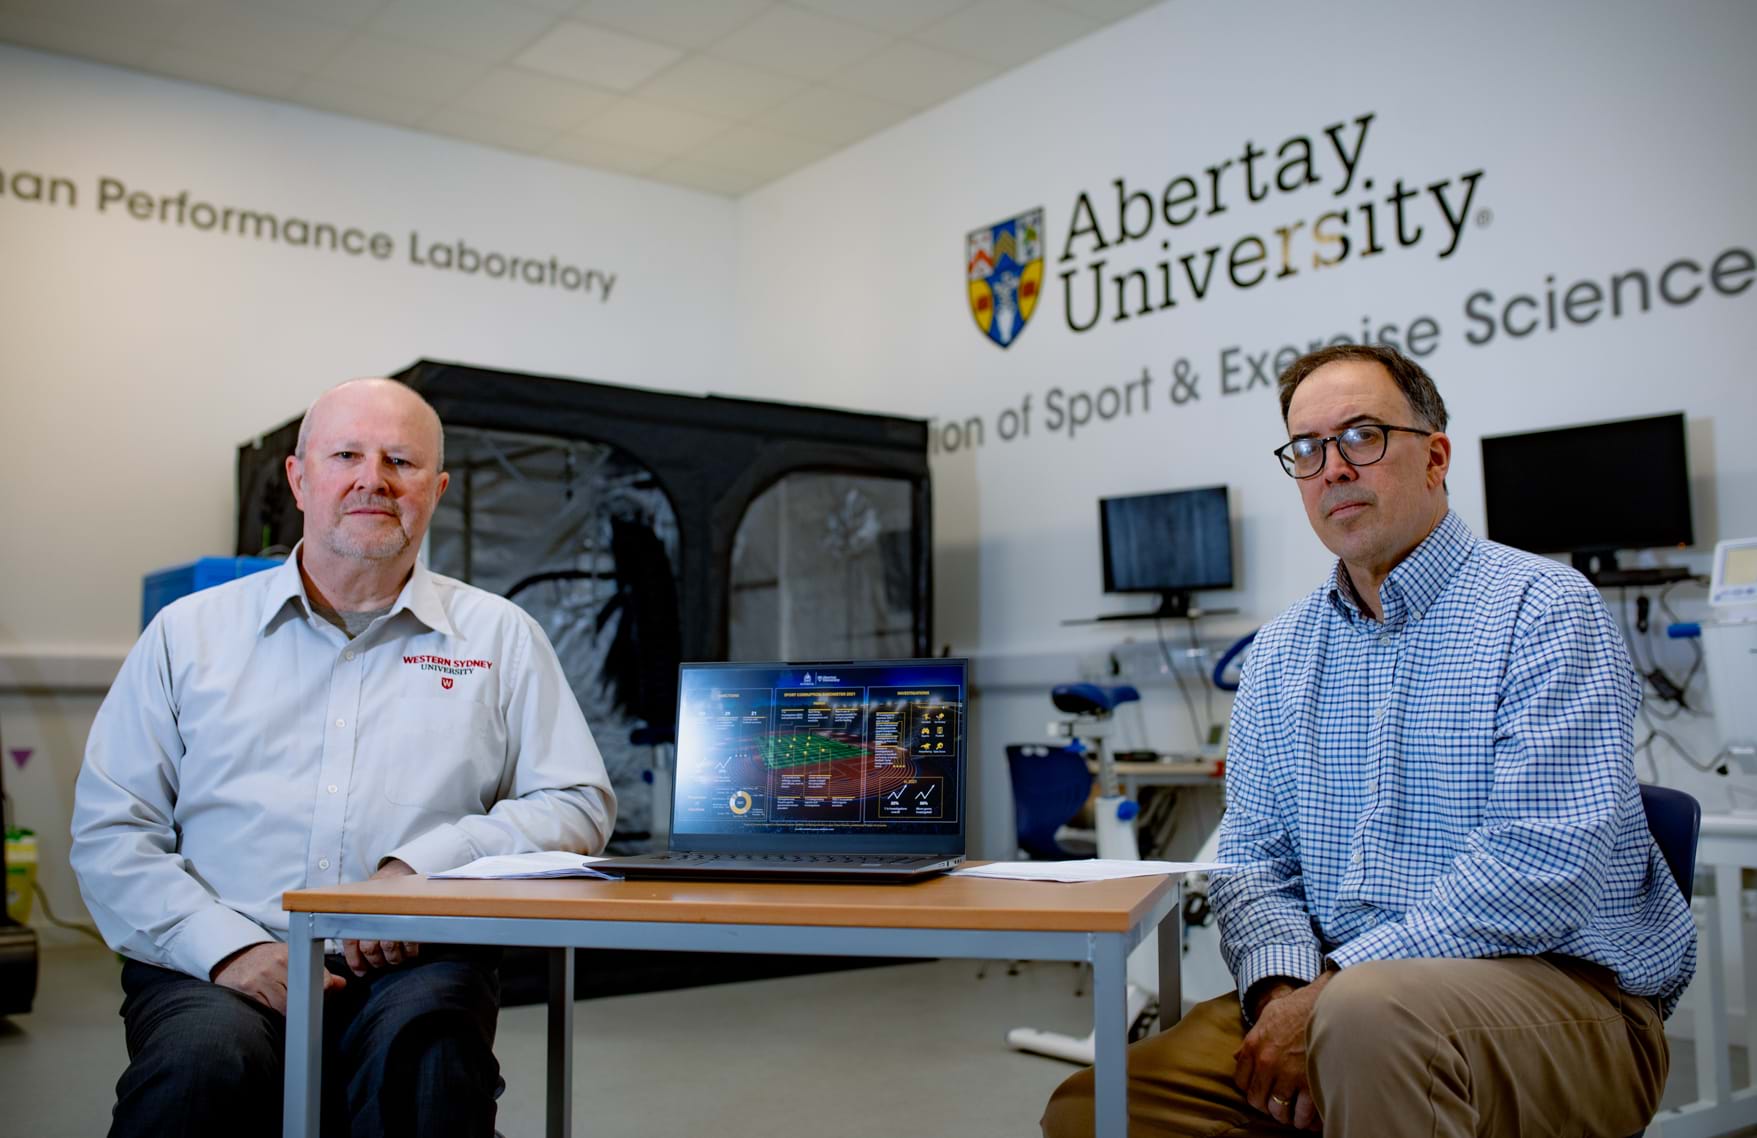 Neil Hall and David Lavallee sitting a sports lab with monitoring equipment in the background and Abertay University branding on the wall.